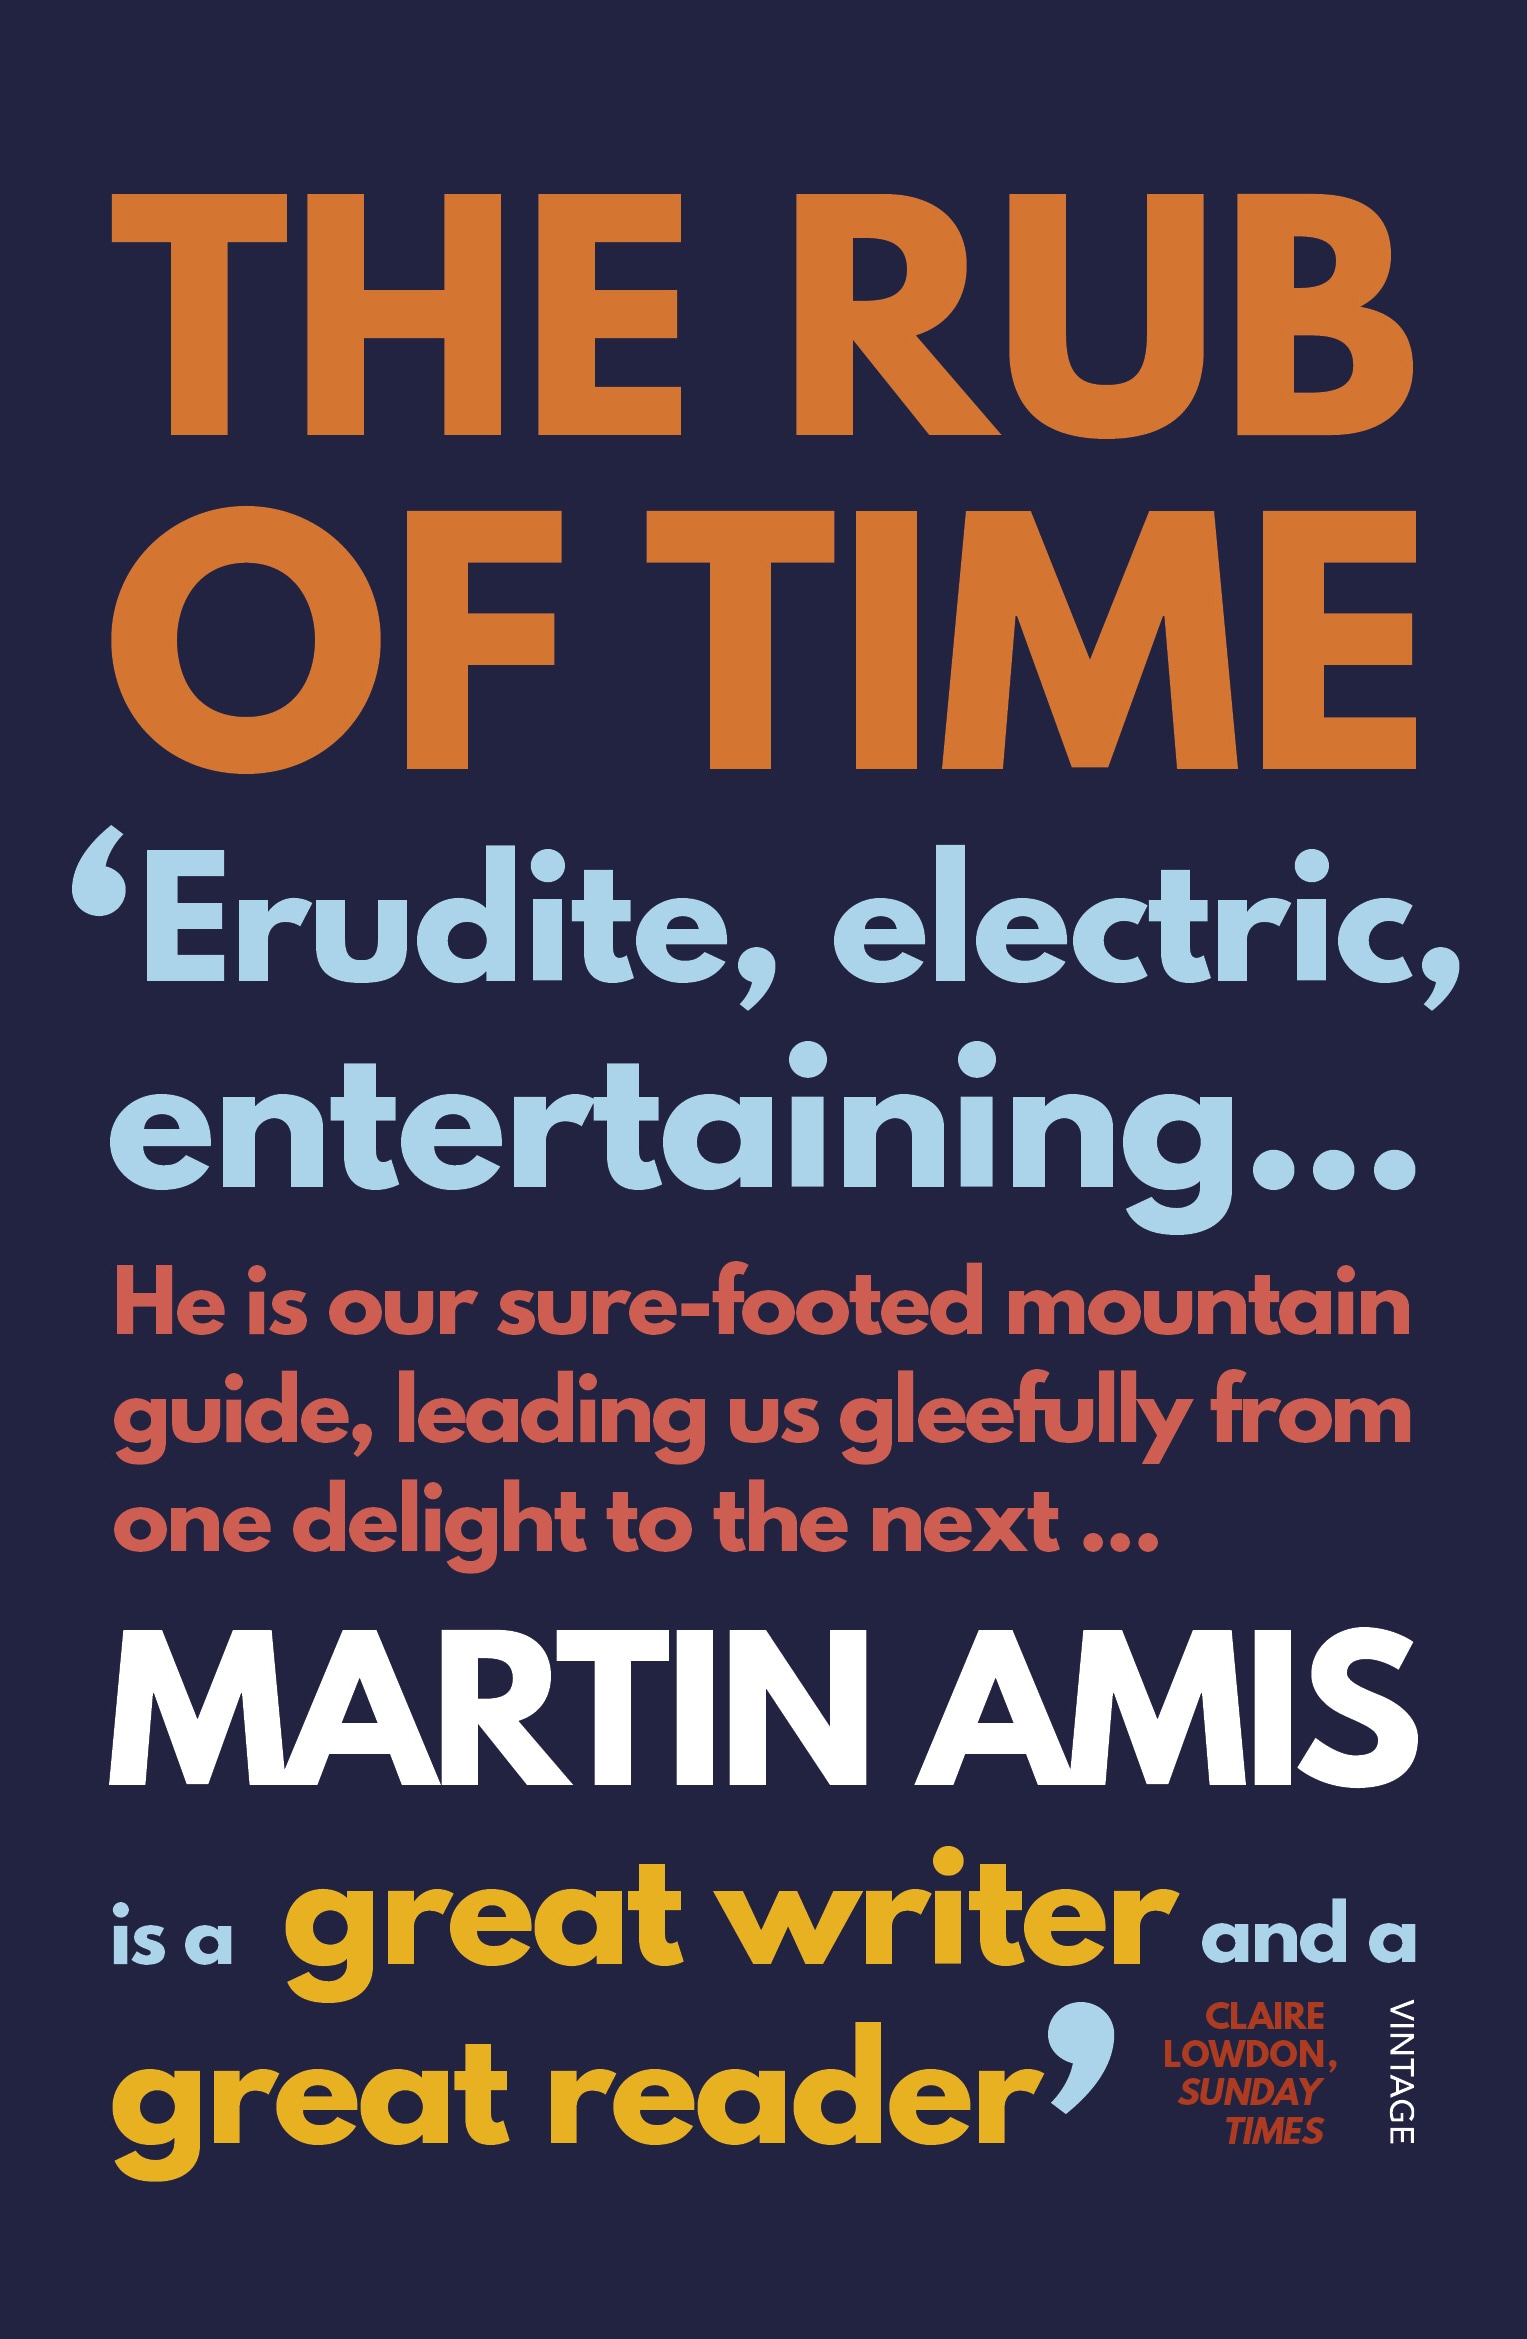 Book “The Rub of Time” by Martin Amis — September 20, 2018